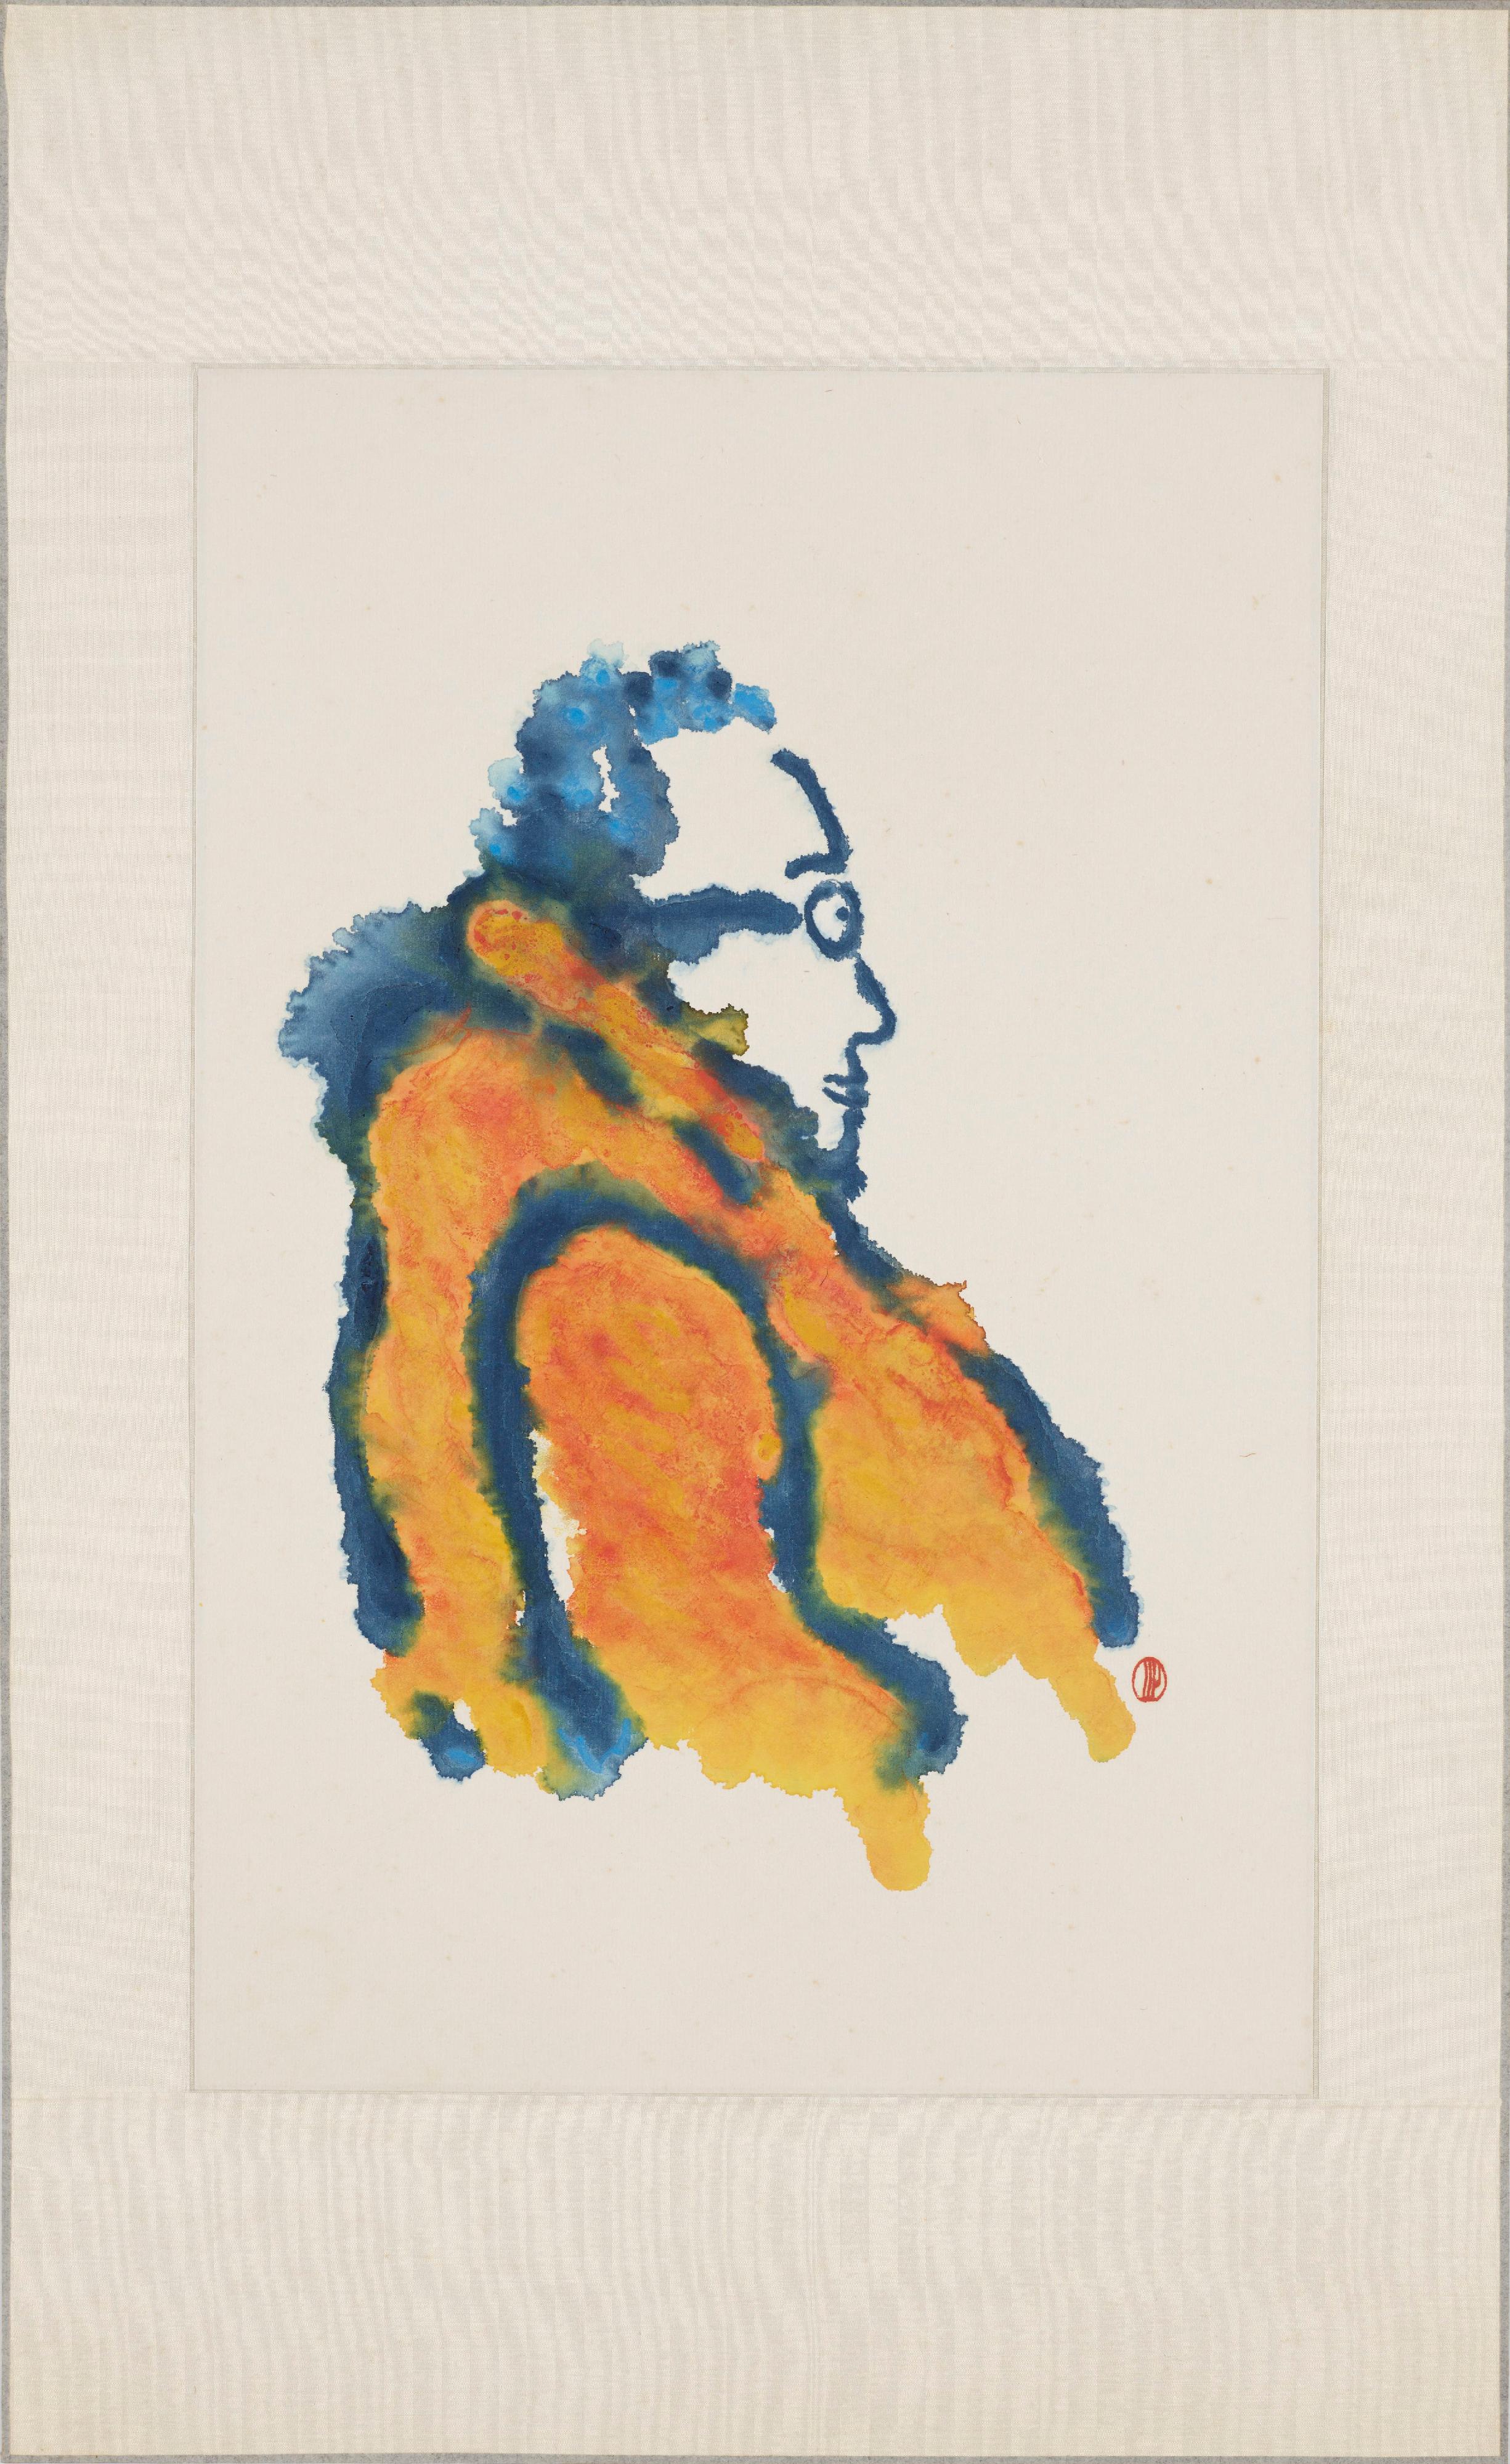 The Hong Kong Museum of Art has received a generous donation of 37 artworks from Ms Chiu Wai-yee, the wife of the late renowned Hong Kong artist Tong King-sum. The donated artworks include works by Tong and the late Hong Kong renowned artist Cheung Yee. The picture shows the portrait painting of Tong by Chiu.